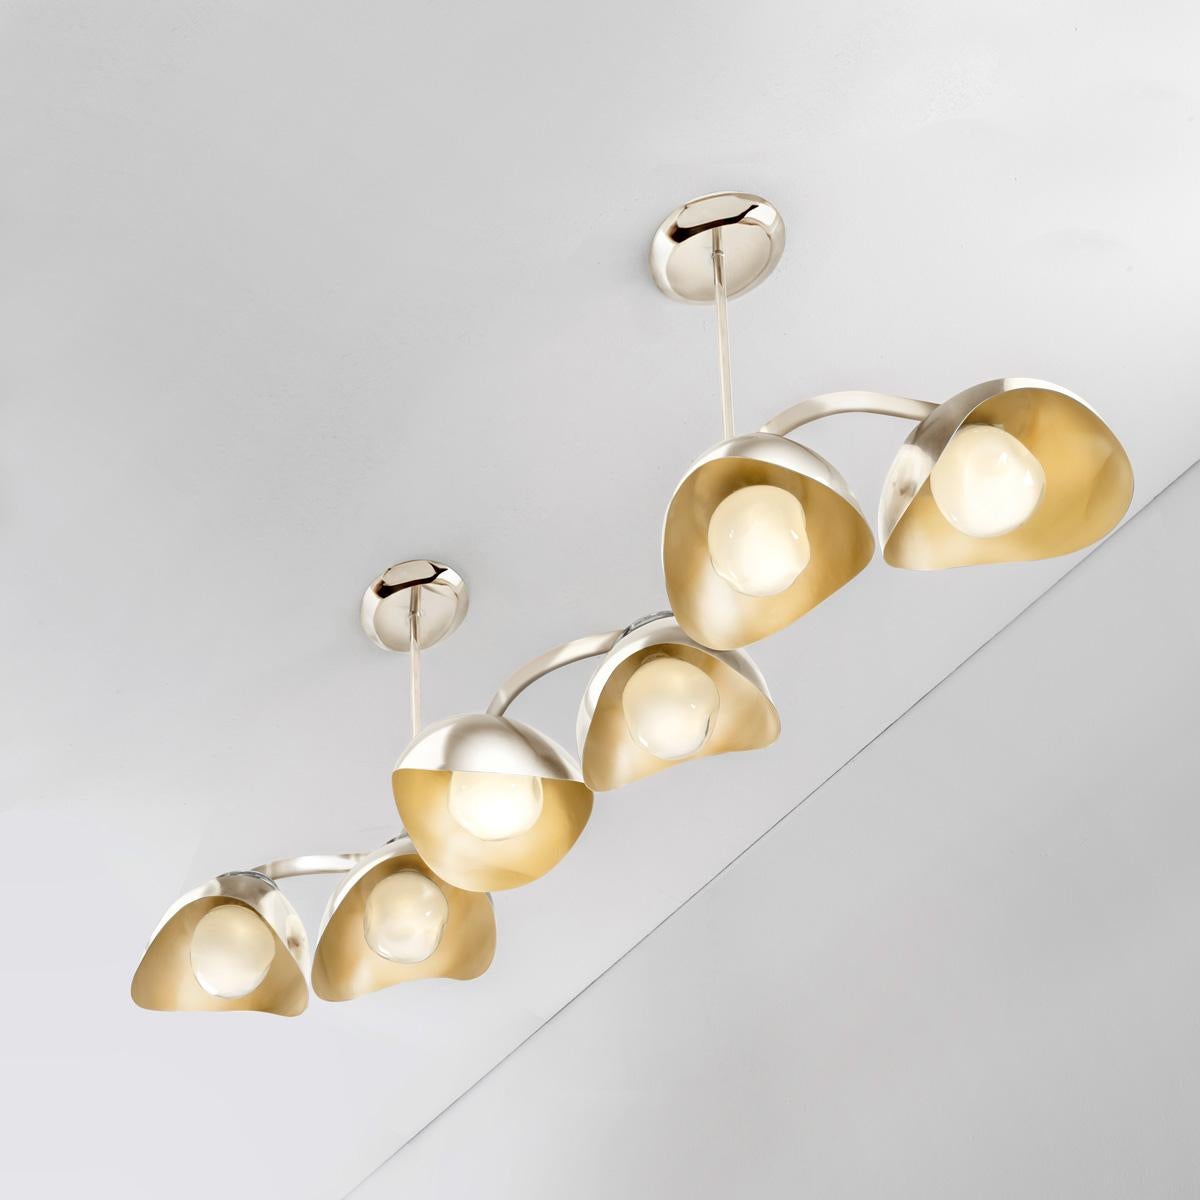 The Serpente ceiling light features a gently winding frame to which are mounted six organic shades. Each shade cradles one of our Sfera glasses on the inside and a clear molded glass on top: both handblown in Murano. The fixture can be suspended by